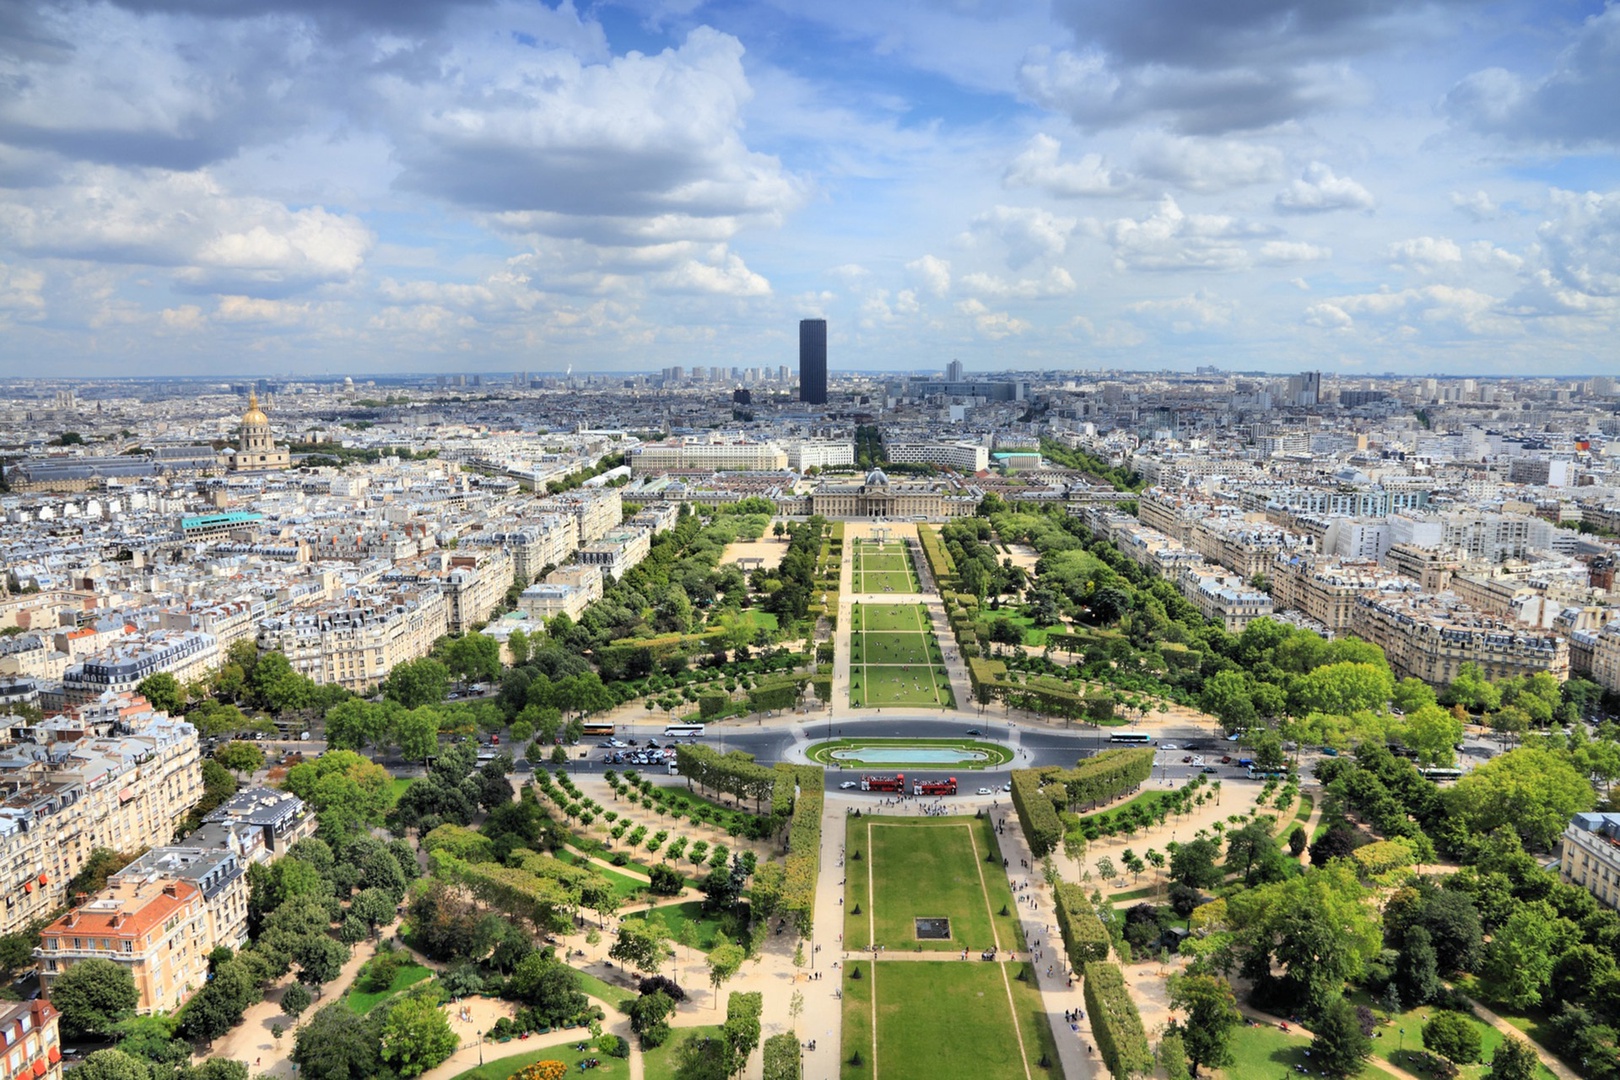 Easily walk to the Eiffel Tower and enjoy a fine view!